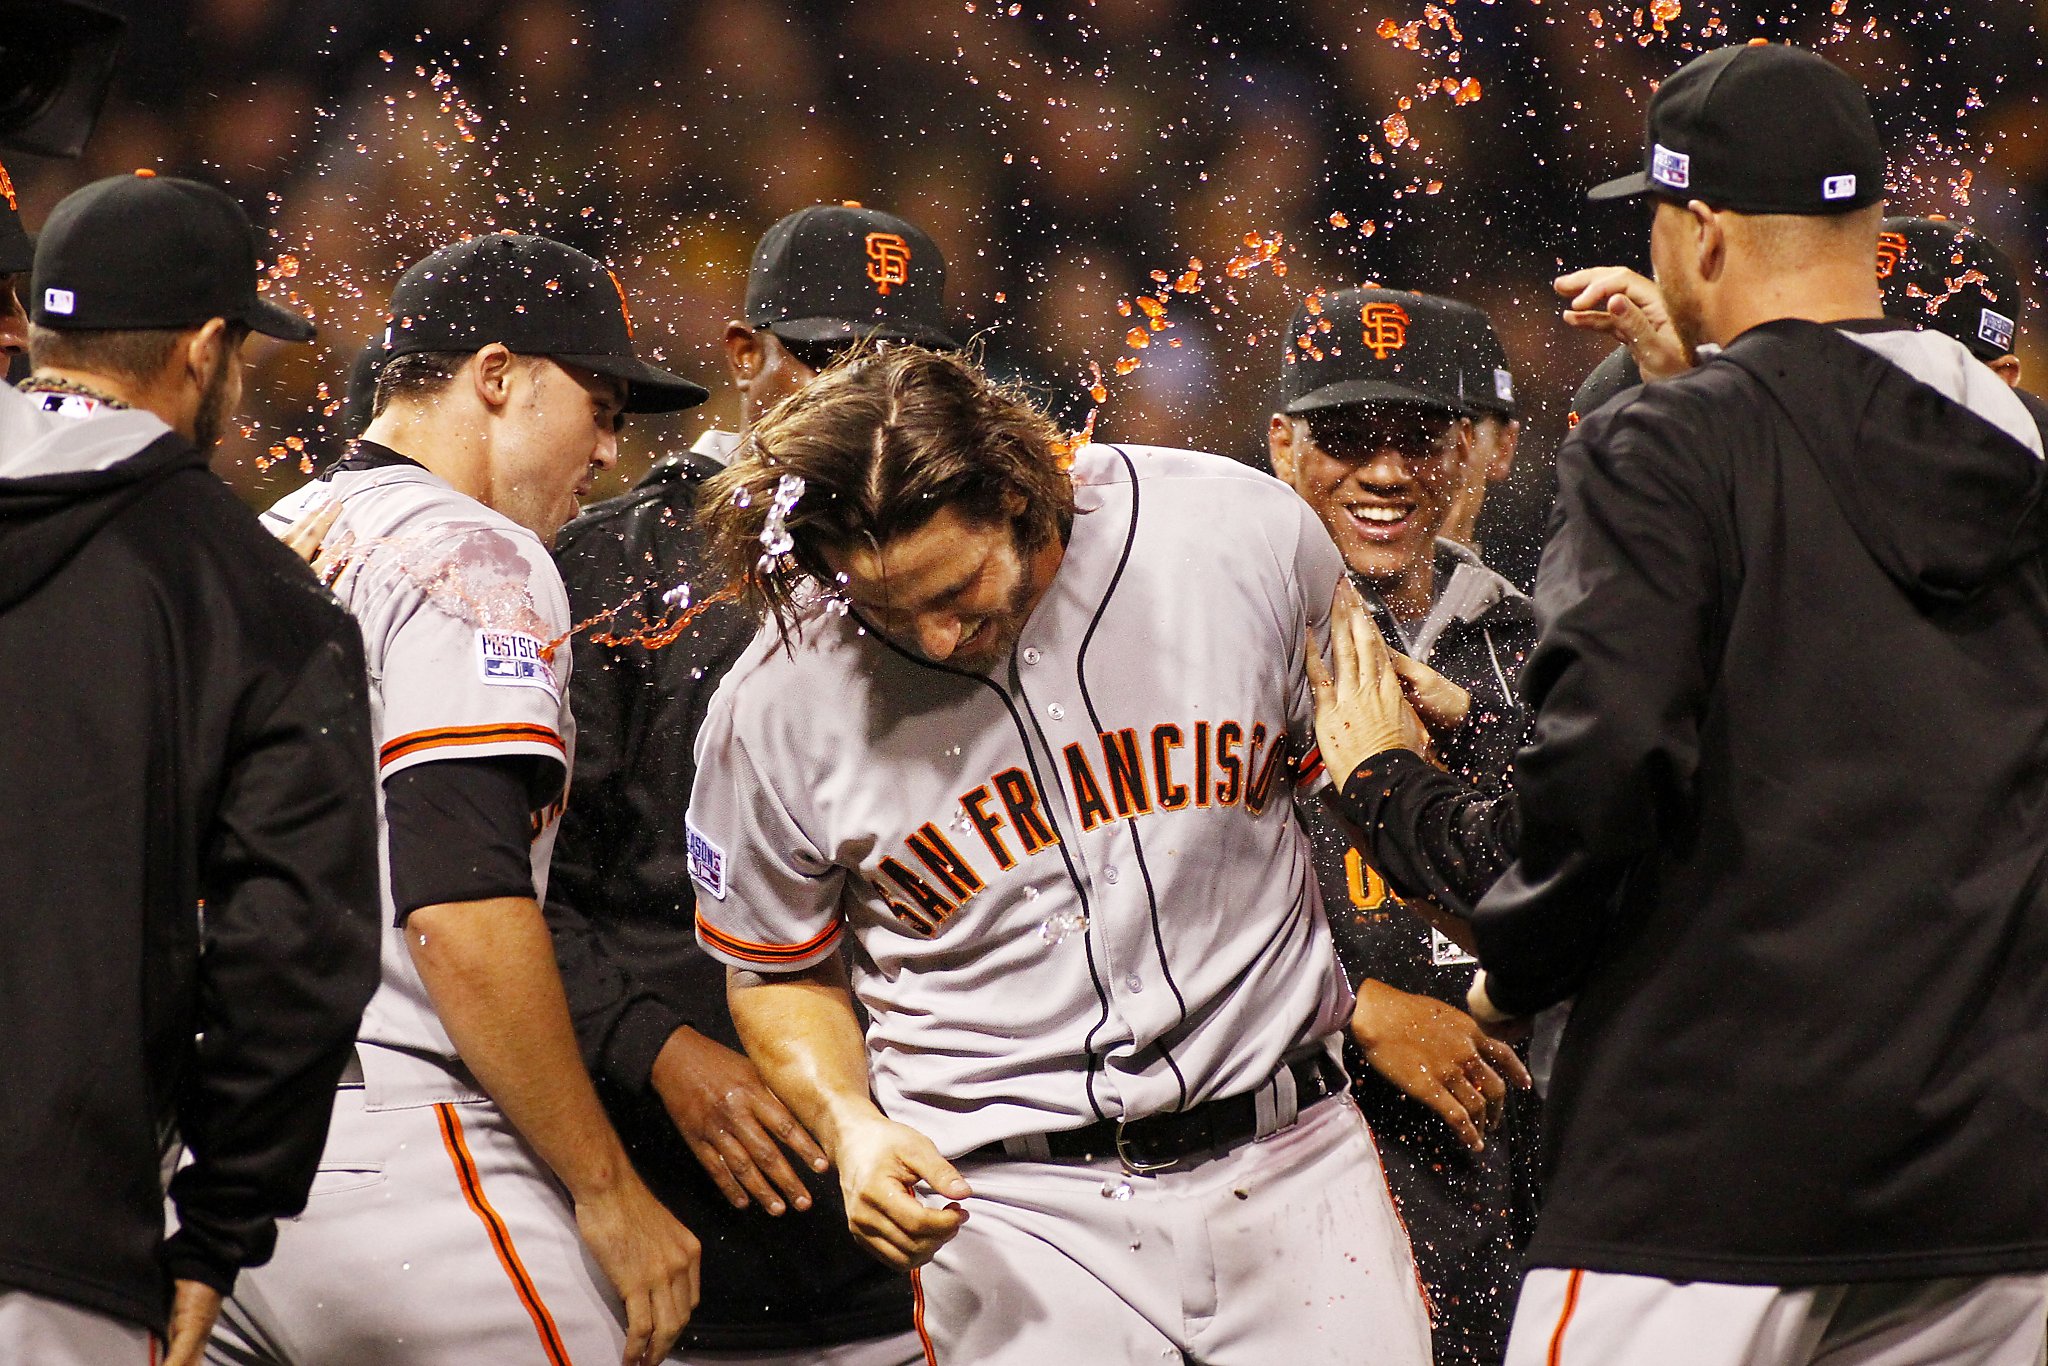 Crawford's slam sets tone as Giants top Pirates 8-0